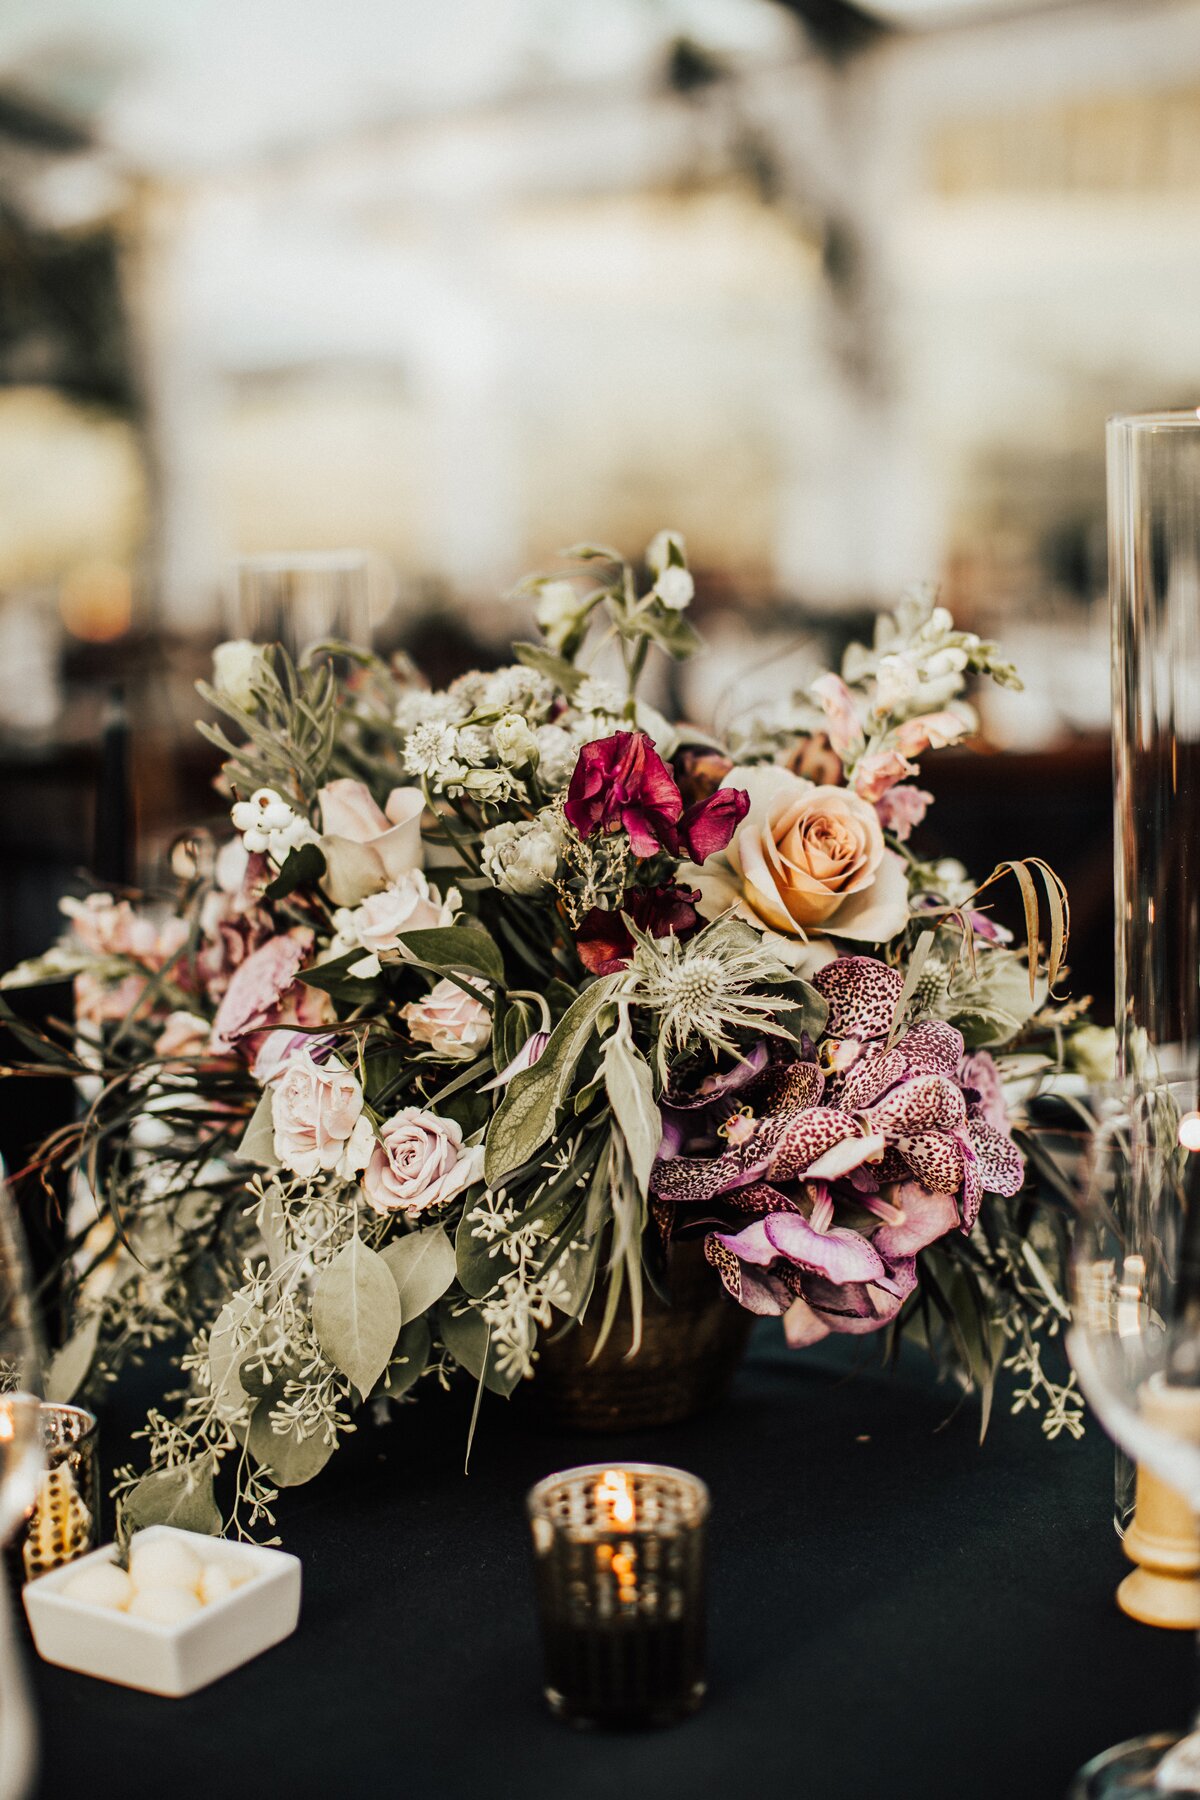 A Moody Gothic Inspired Wedding In A Vermont Birch Grove